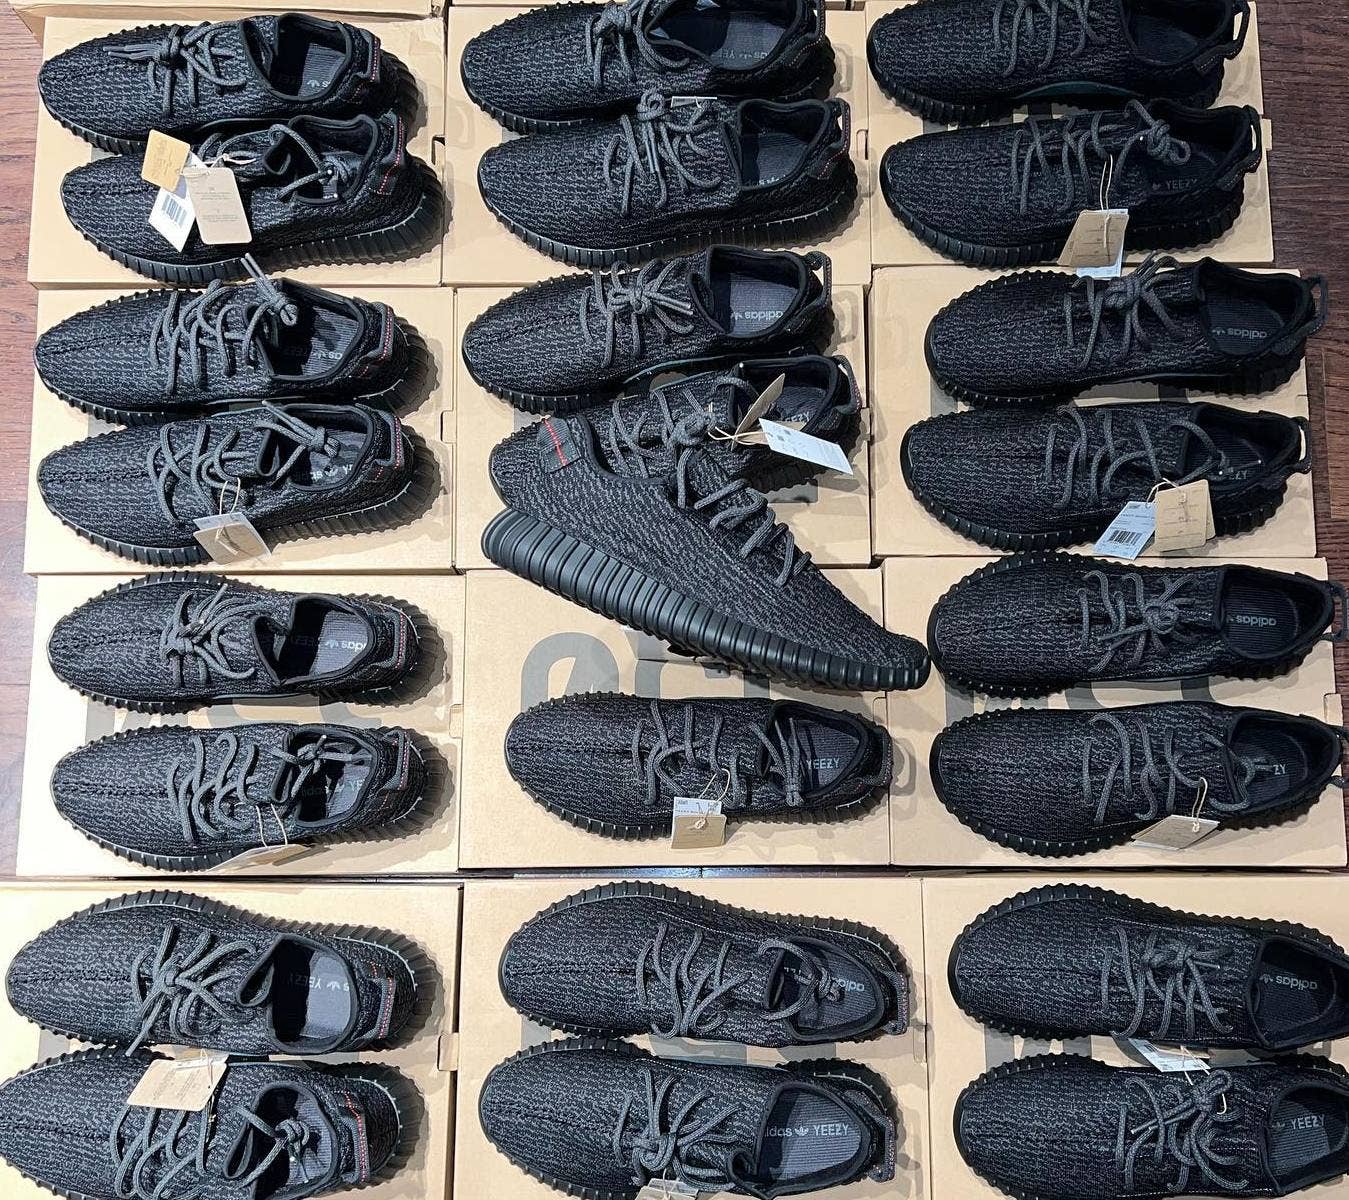 Announces Plan to Yeezy Sneakers | Complex